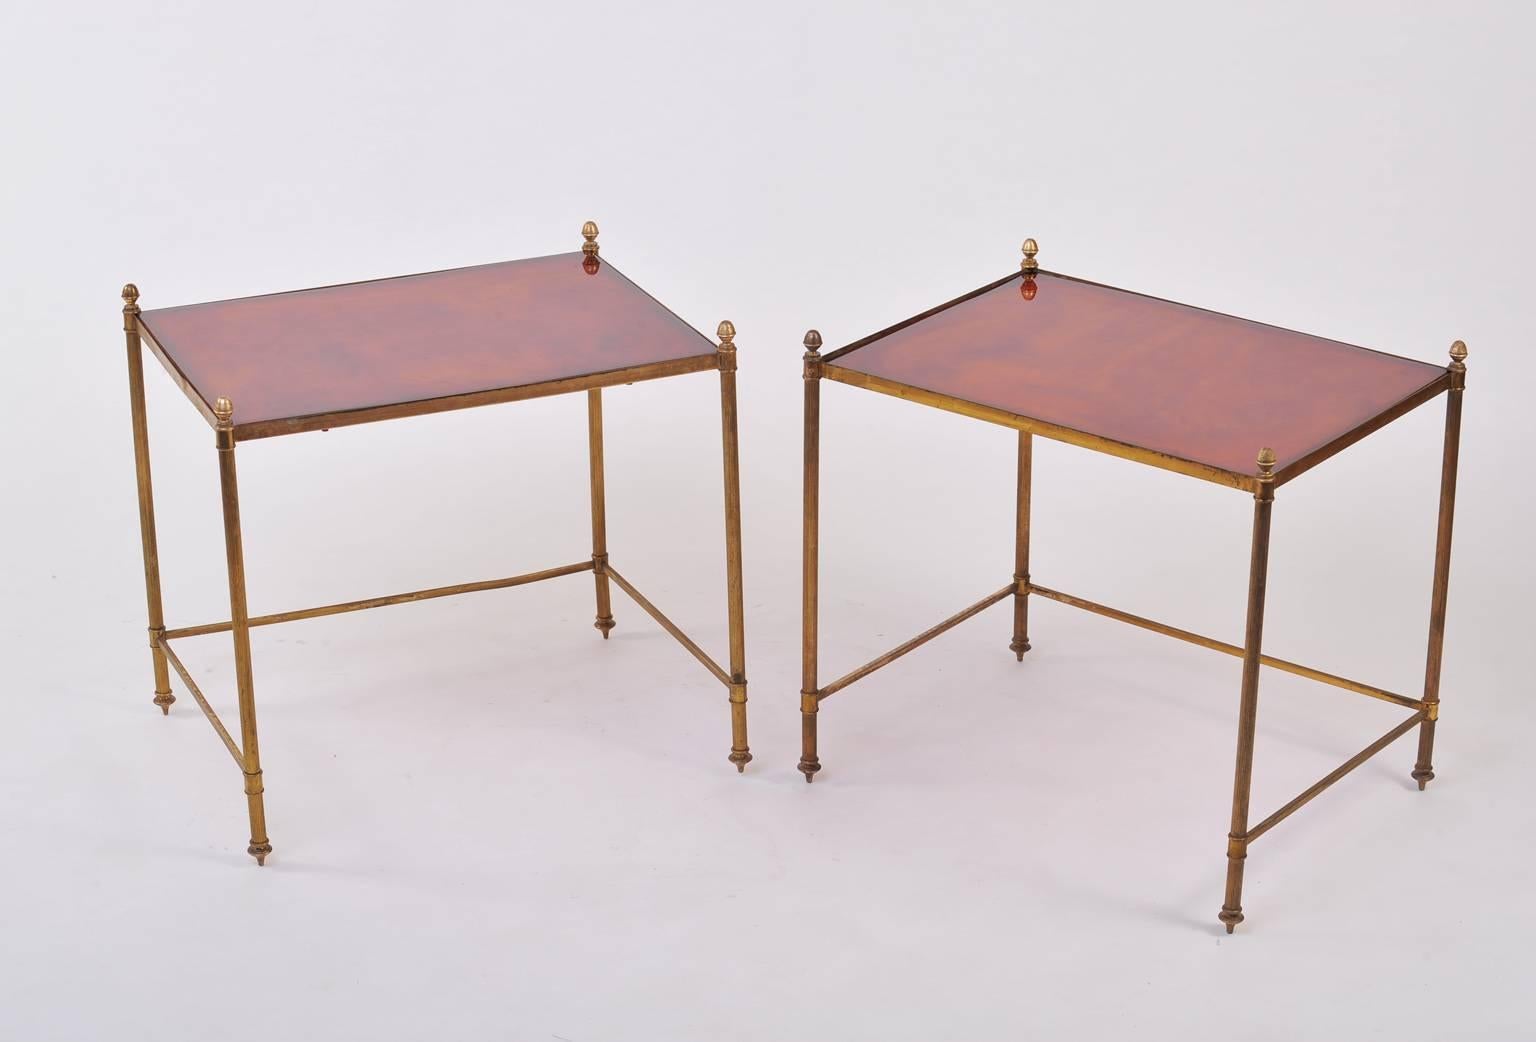 A pair of gilt brass and faux tortoiseshell tops side tables, on toupie feet and topped with acorn finials
Possibly by Maison Baguès,
France, circa 1950.